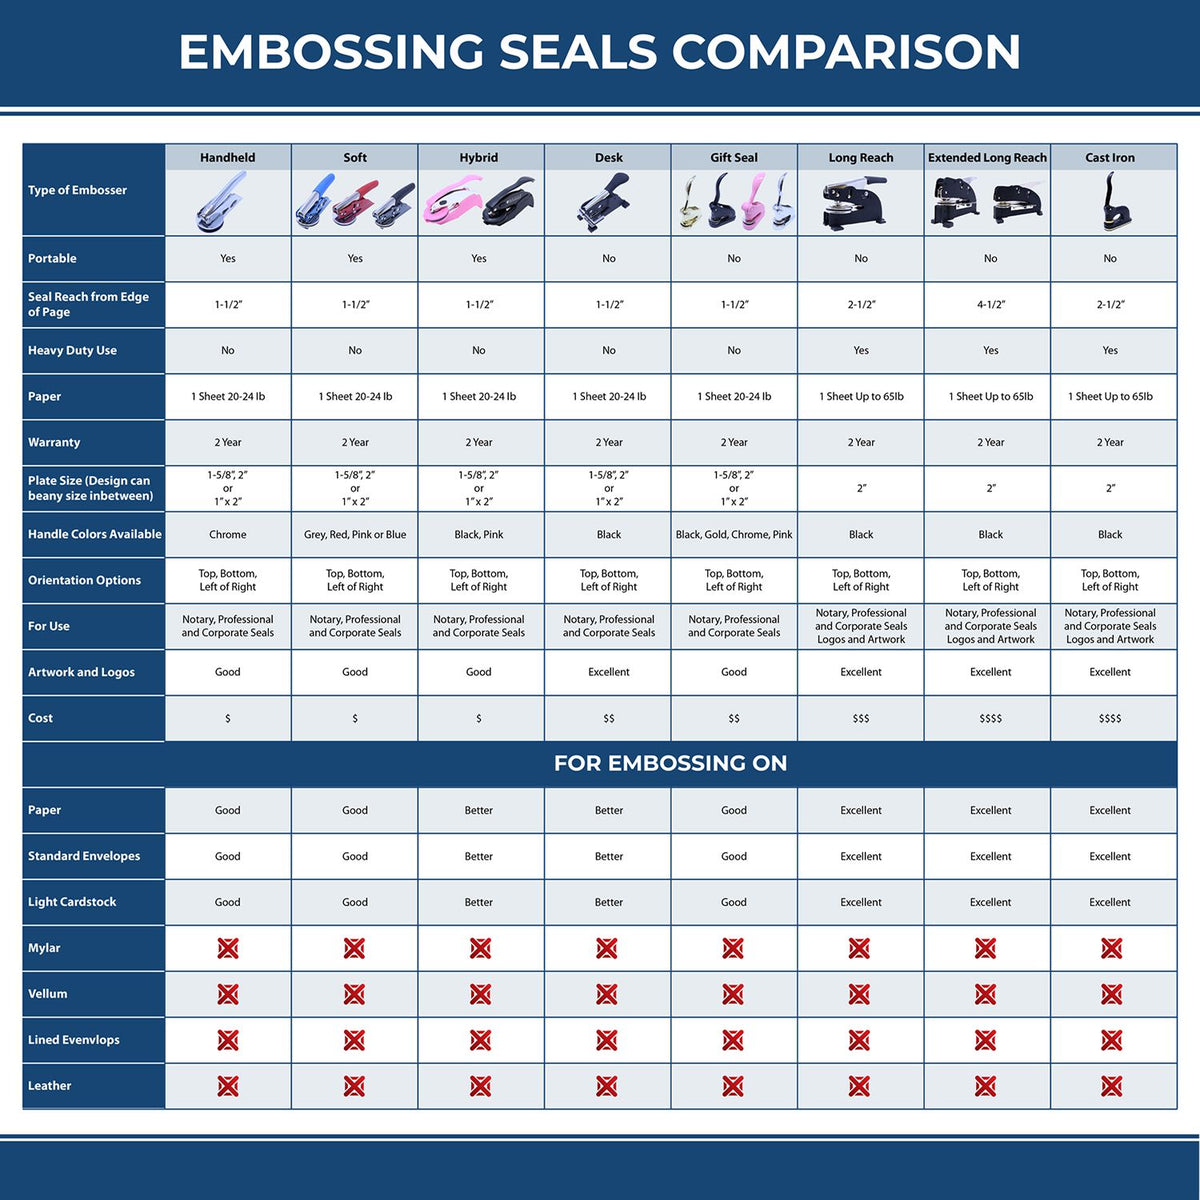 A comparison chart for the different types of mount models available for the Alabama Desk Architect Embossing Seal.